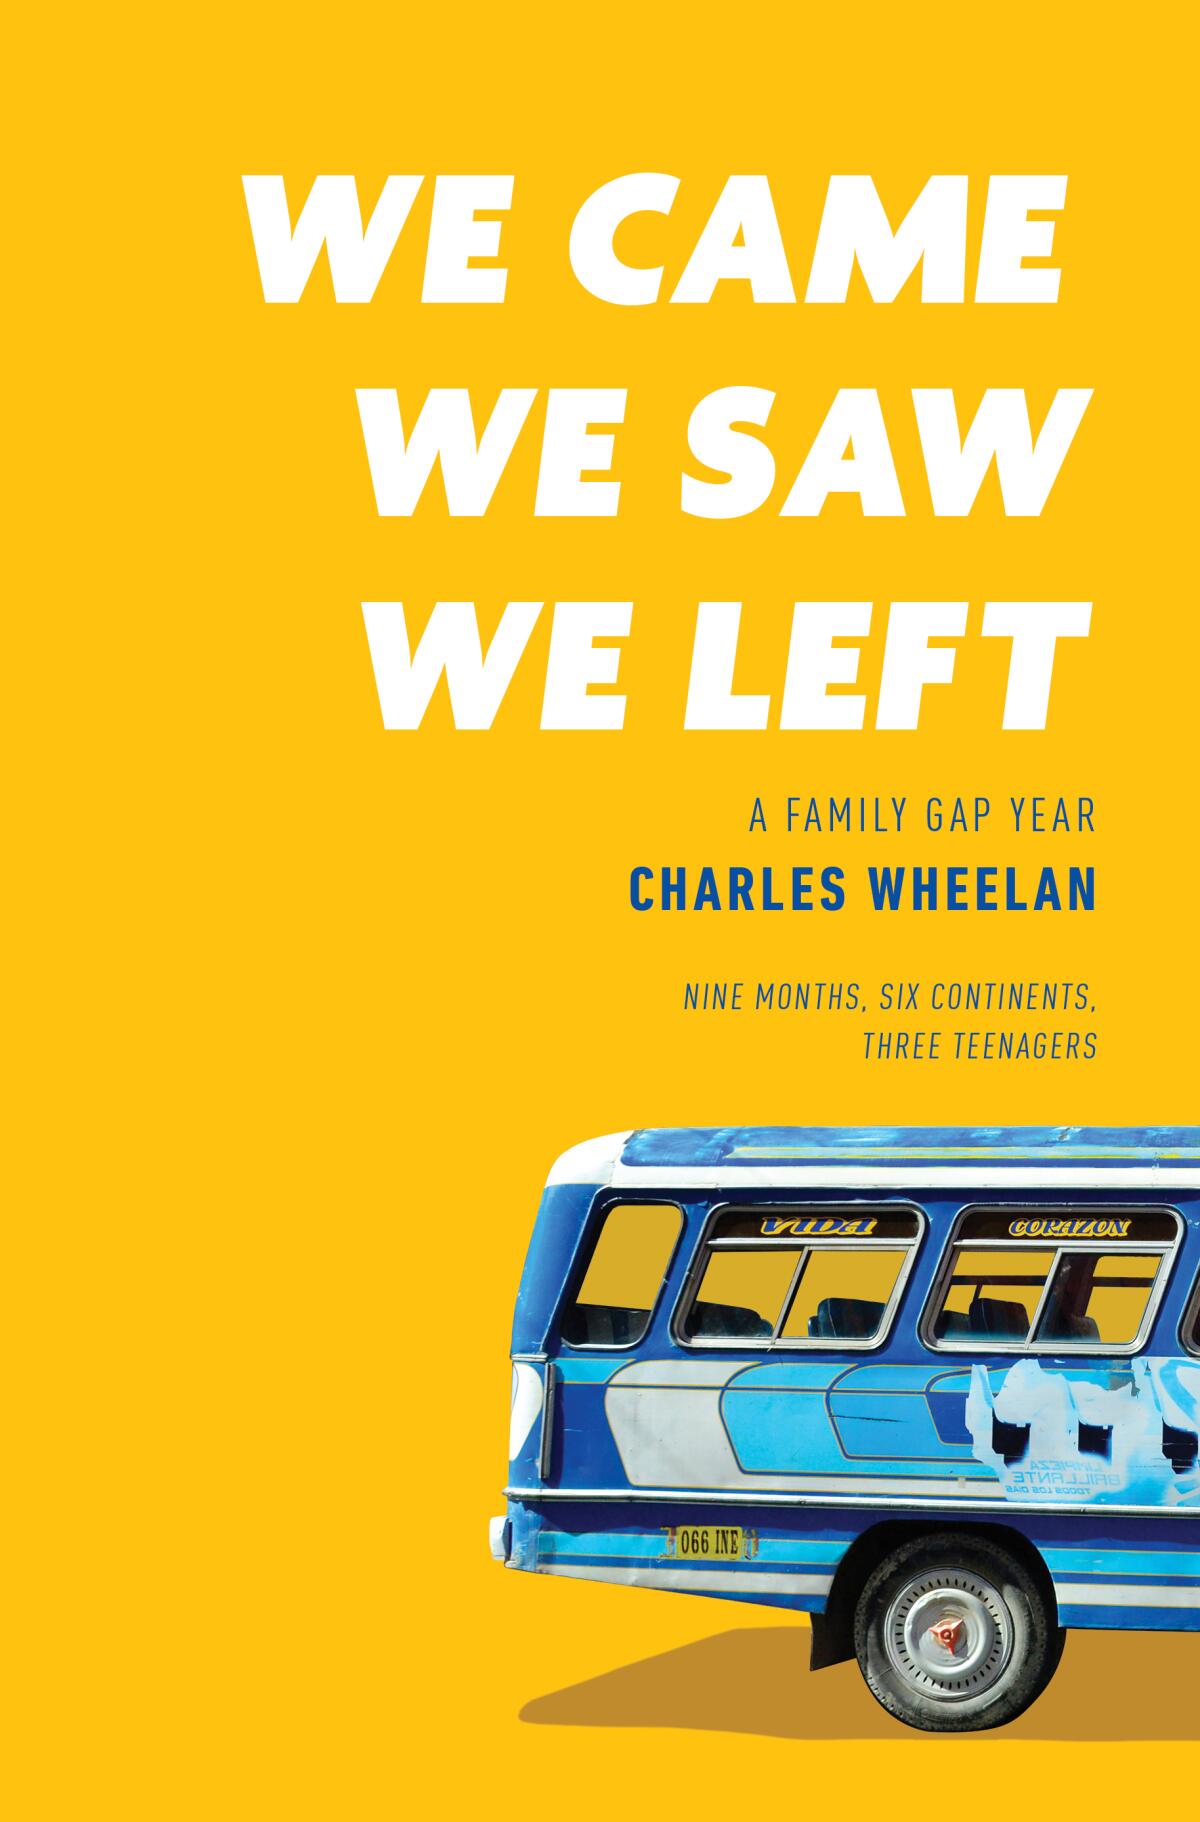 The book jacket for “We Came, We Saw, We Left: A Family Gap Year” by Charles Wheelan.